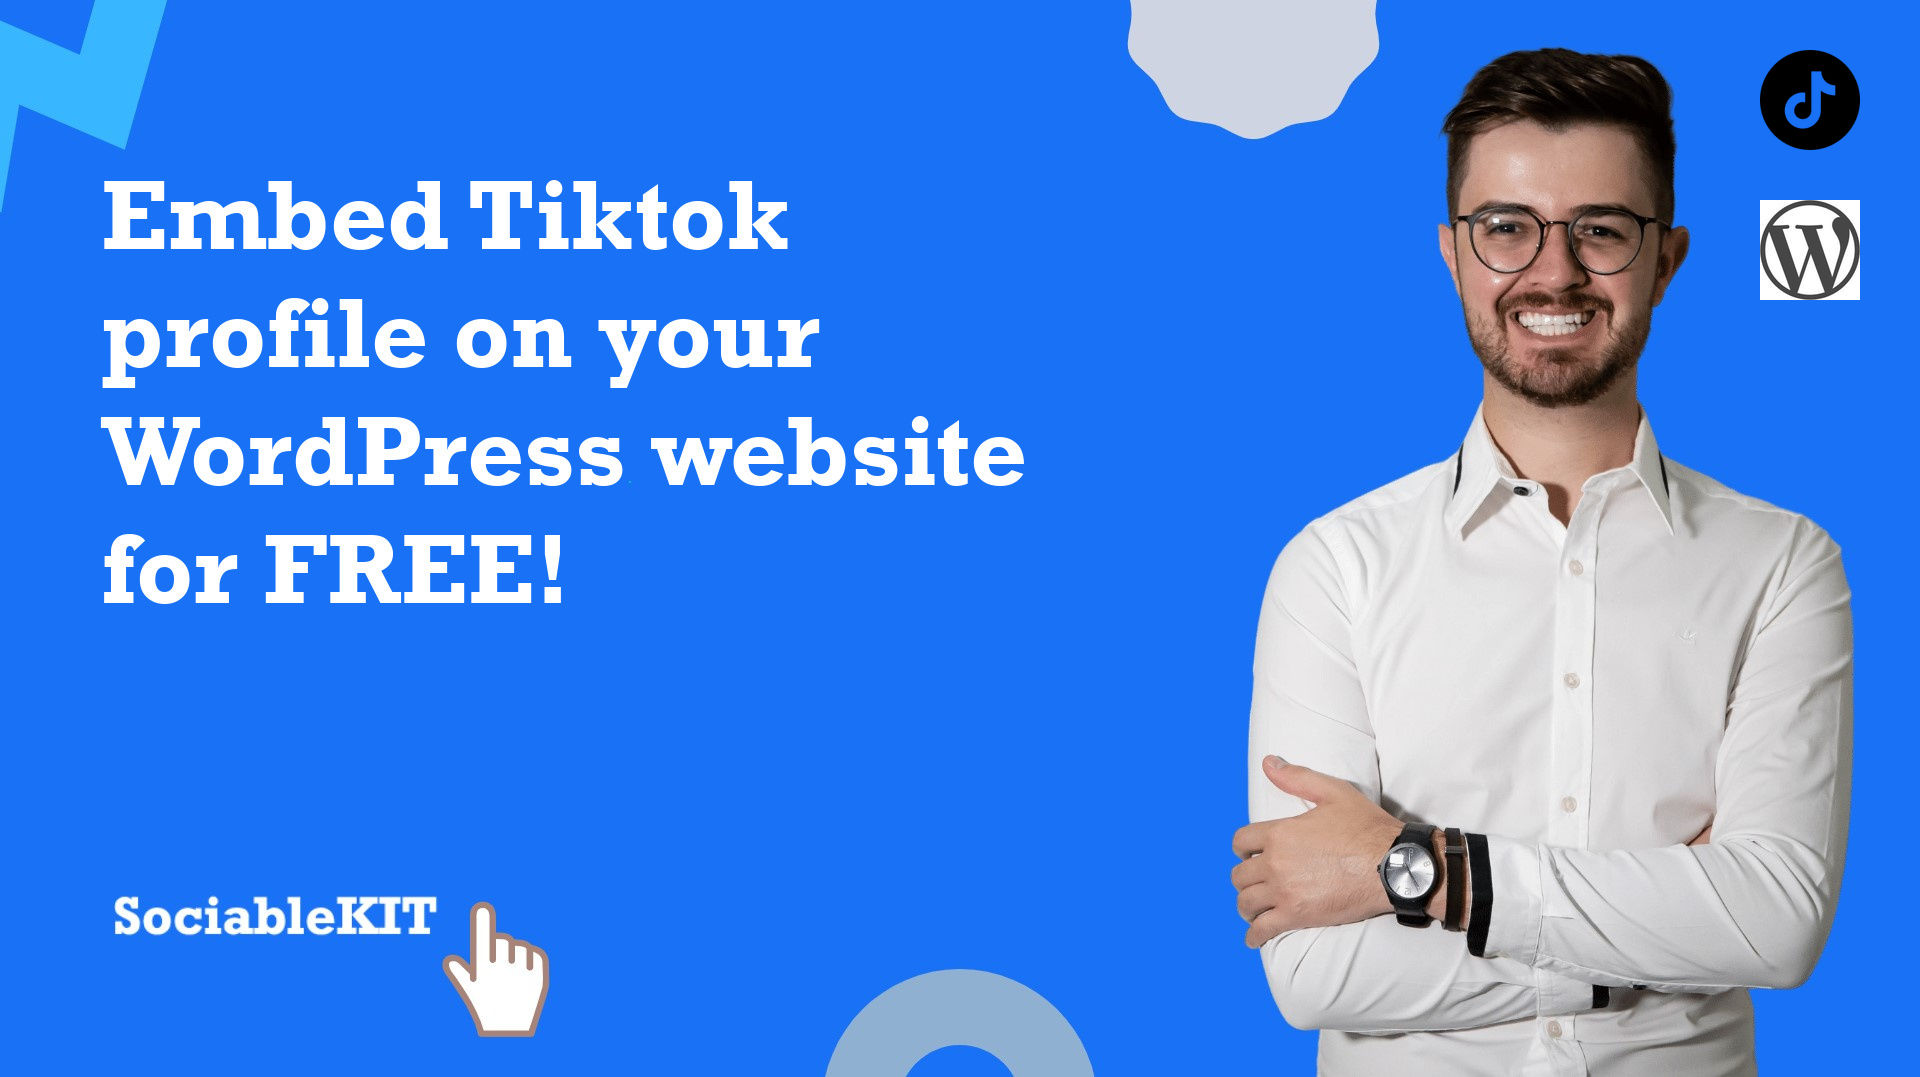 How to embed Tiktok profile on your WordPress website for FREE?